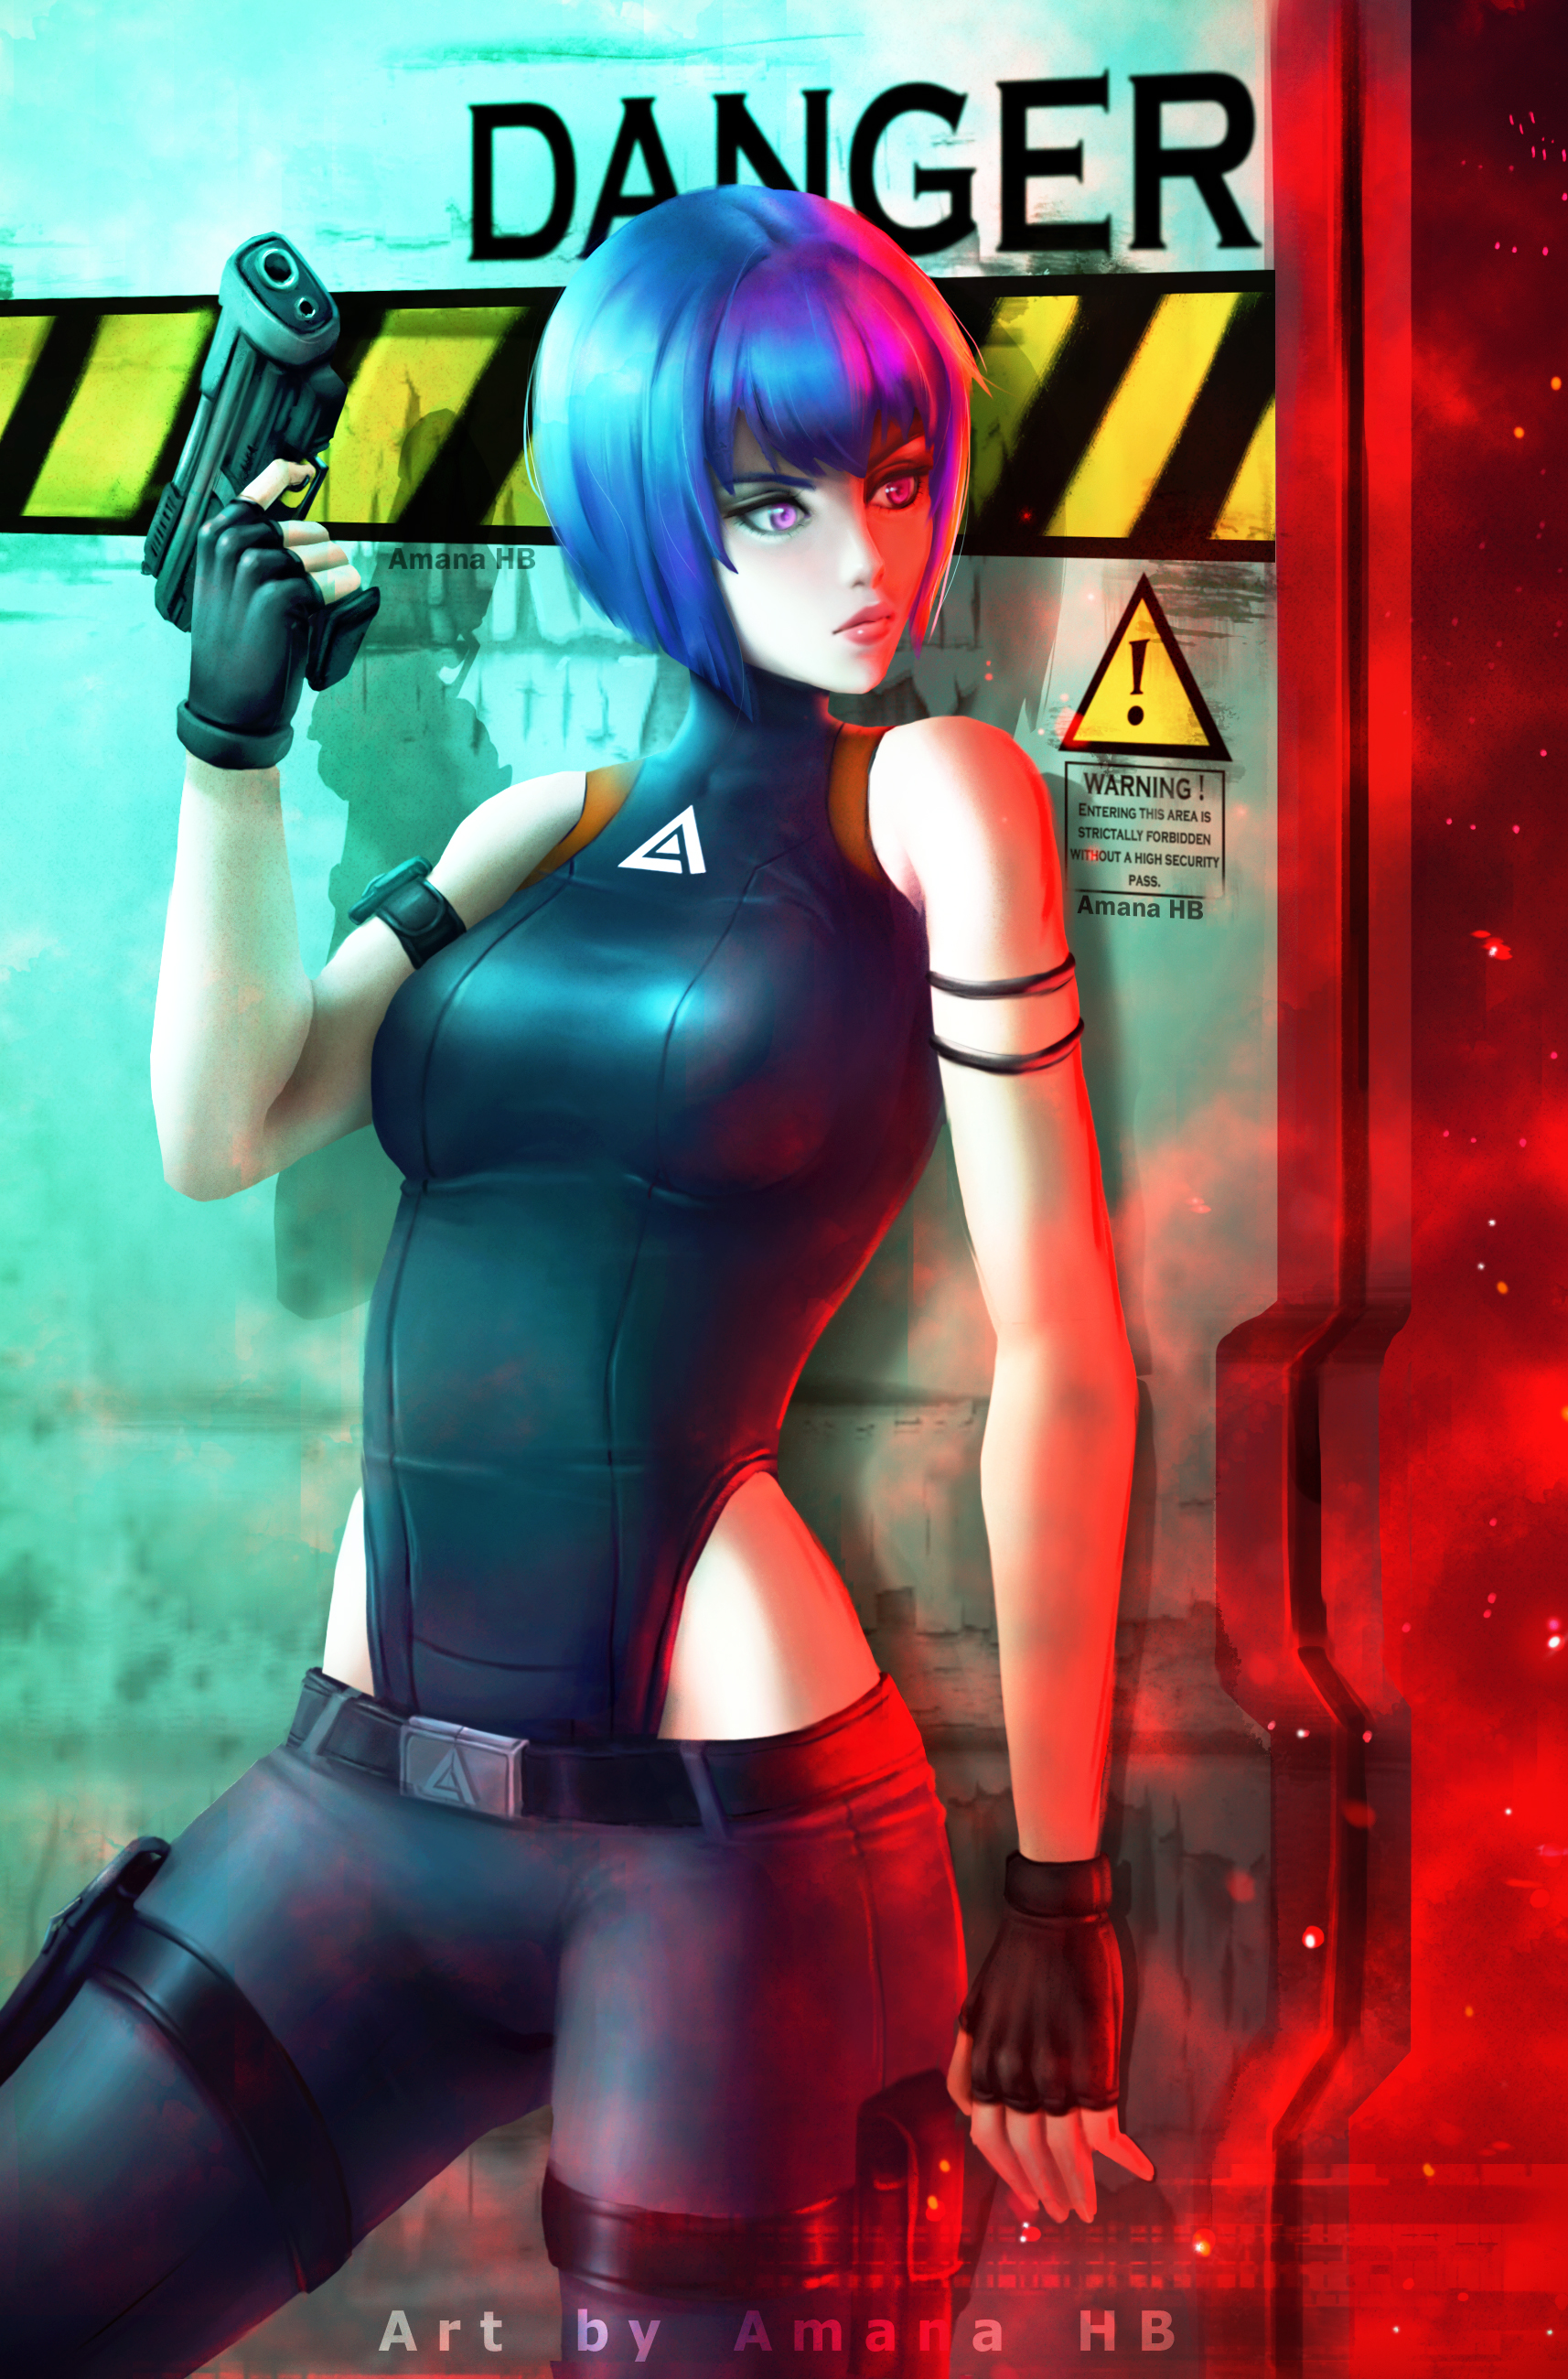 Ghost in the Shell: SAC_2045 Art by Amana_HB